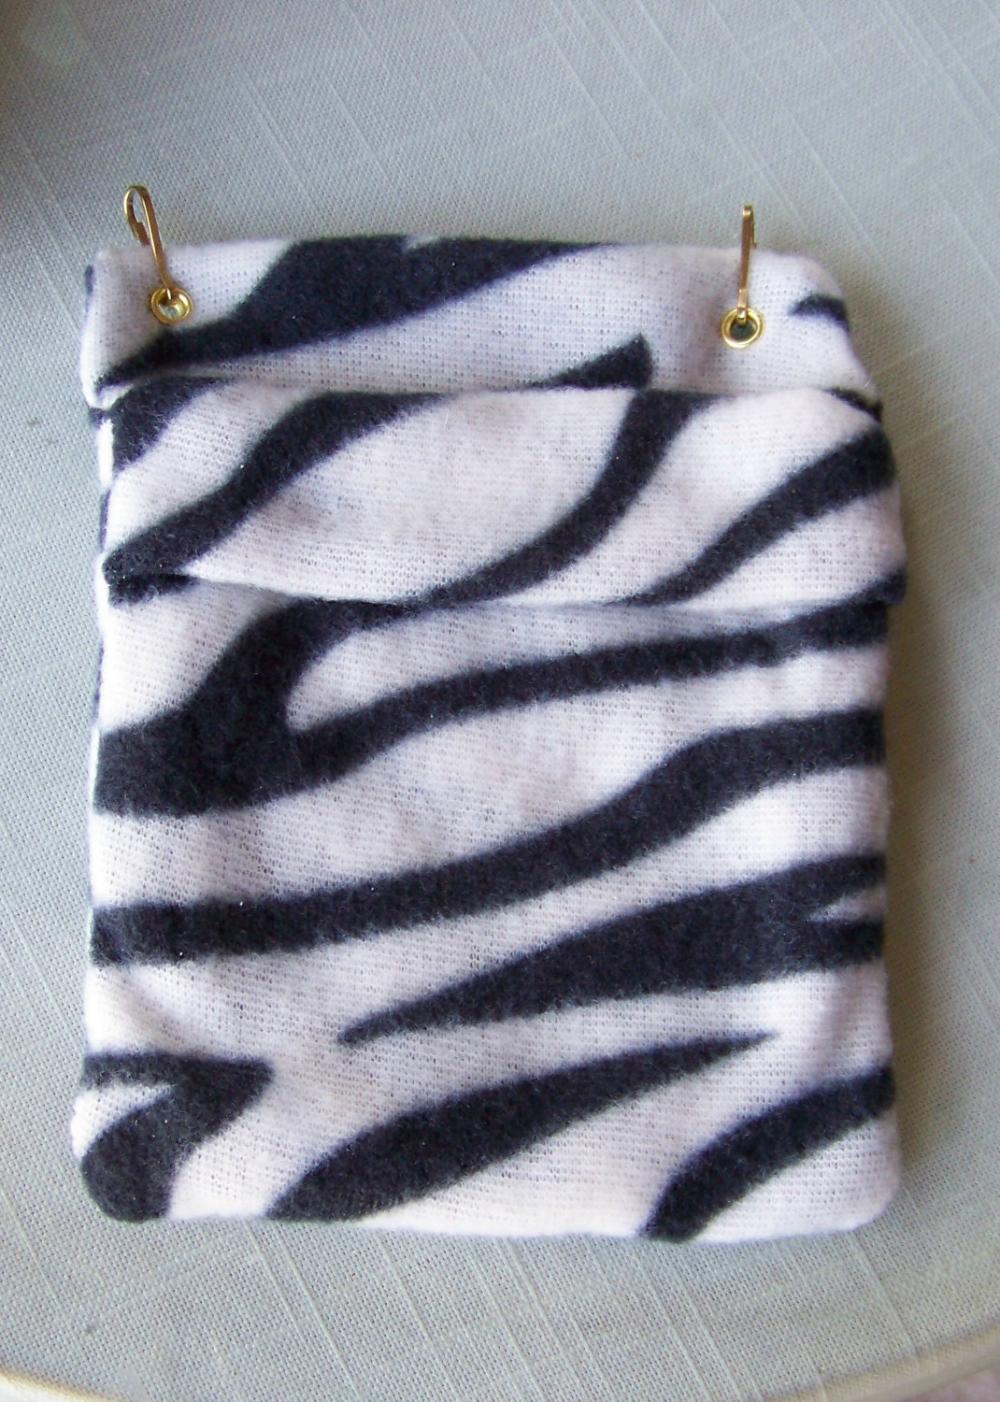 Fleece Bonding Pouch For Small Pets - Black And White Zebra Stripe Patterned Fleece - 5x6 Inches